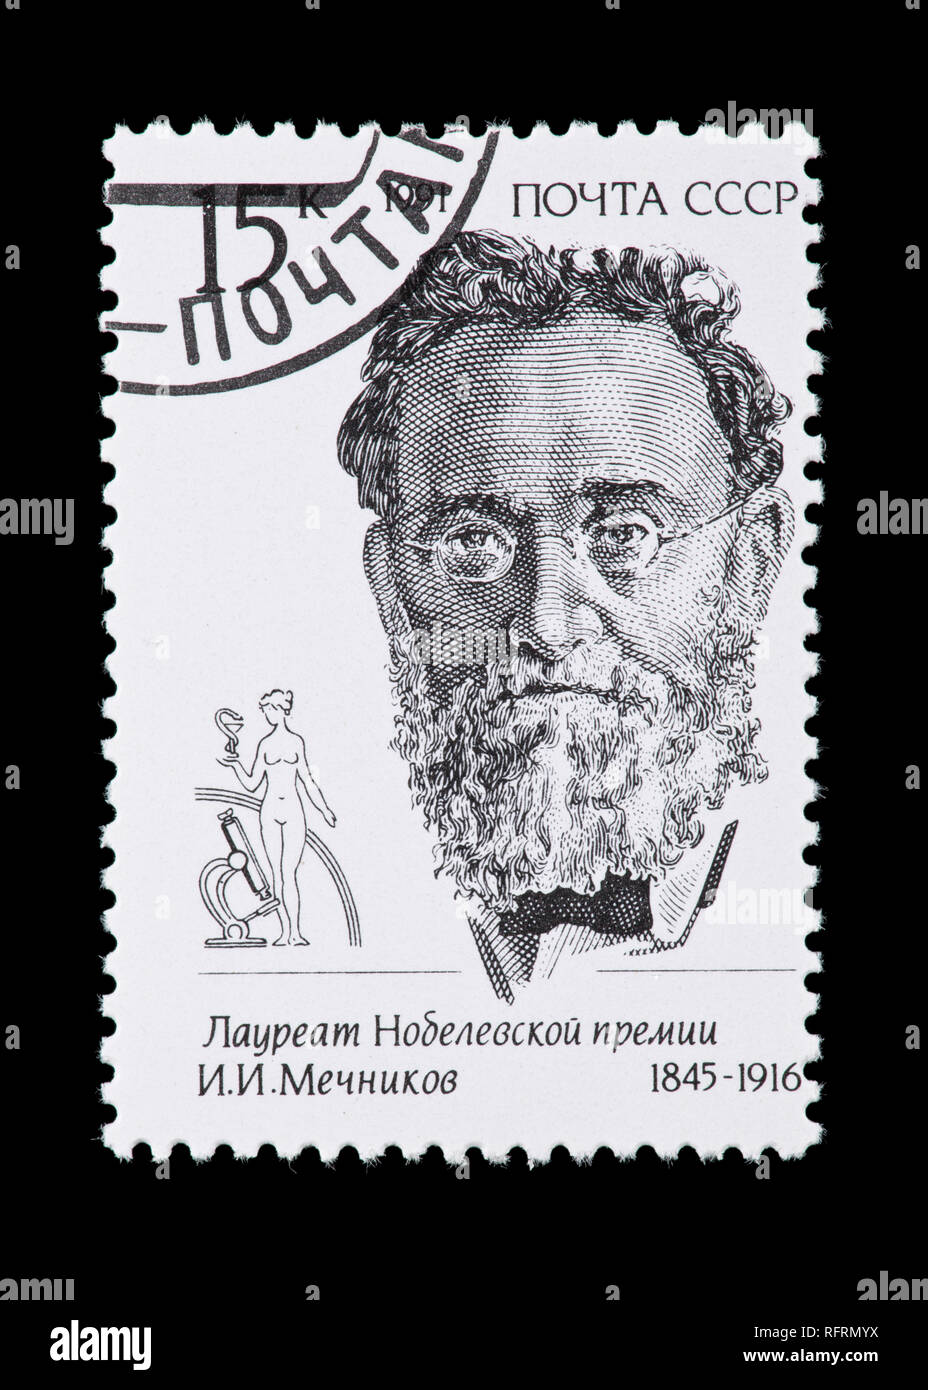 Postage stamp from the Soviet Union (USSR) depicting Elie Metchnikoff, physiologist. Stock Photo